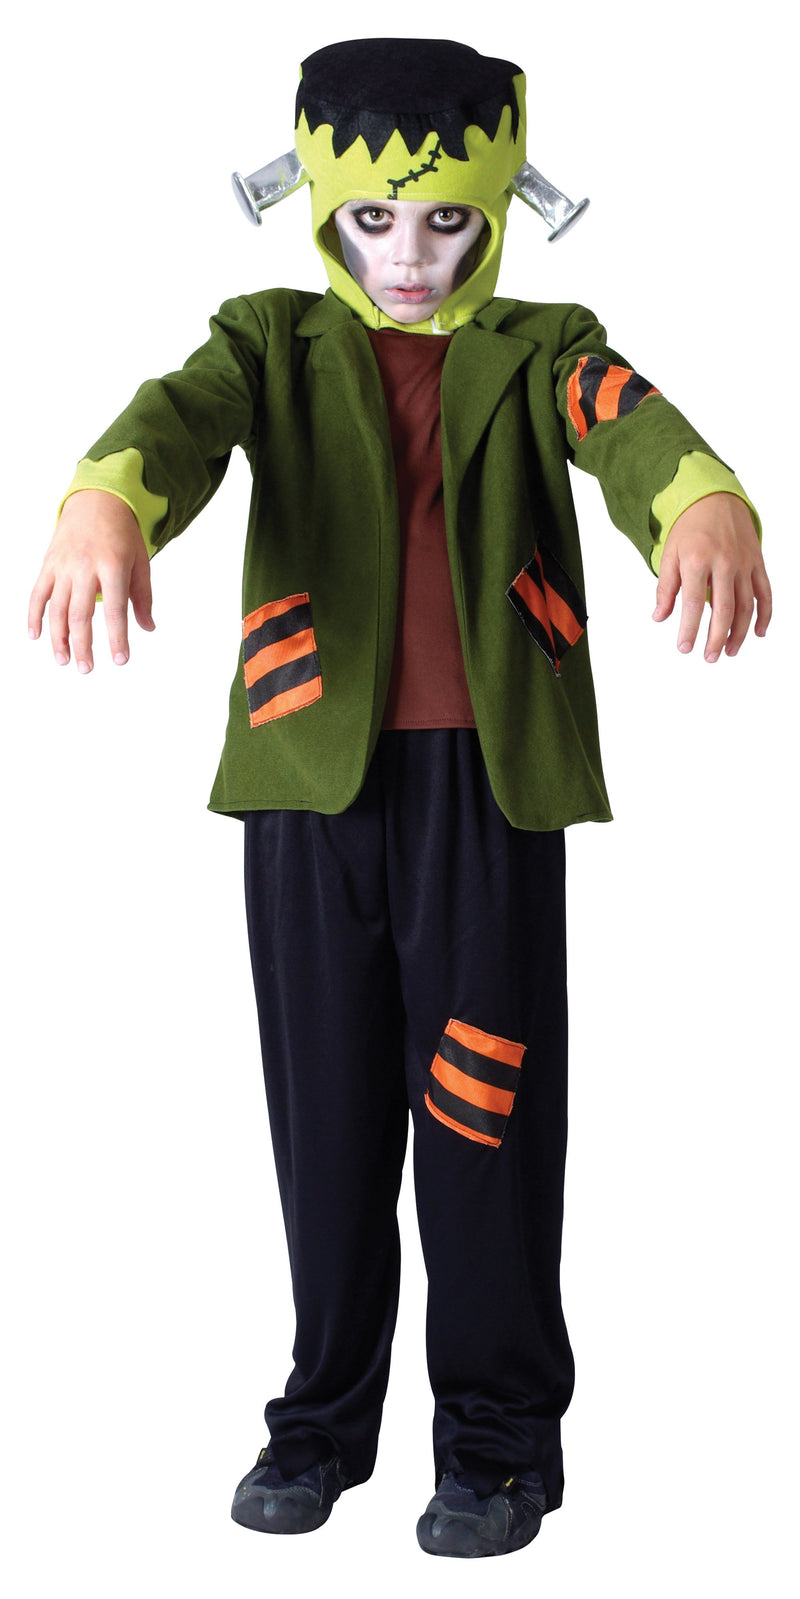 Monster Frankenstein Small Childrens Costumes Male Small 5 7 Years Boys Bristol Novelty Childrens Costumes 2298